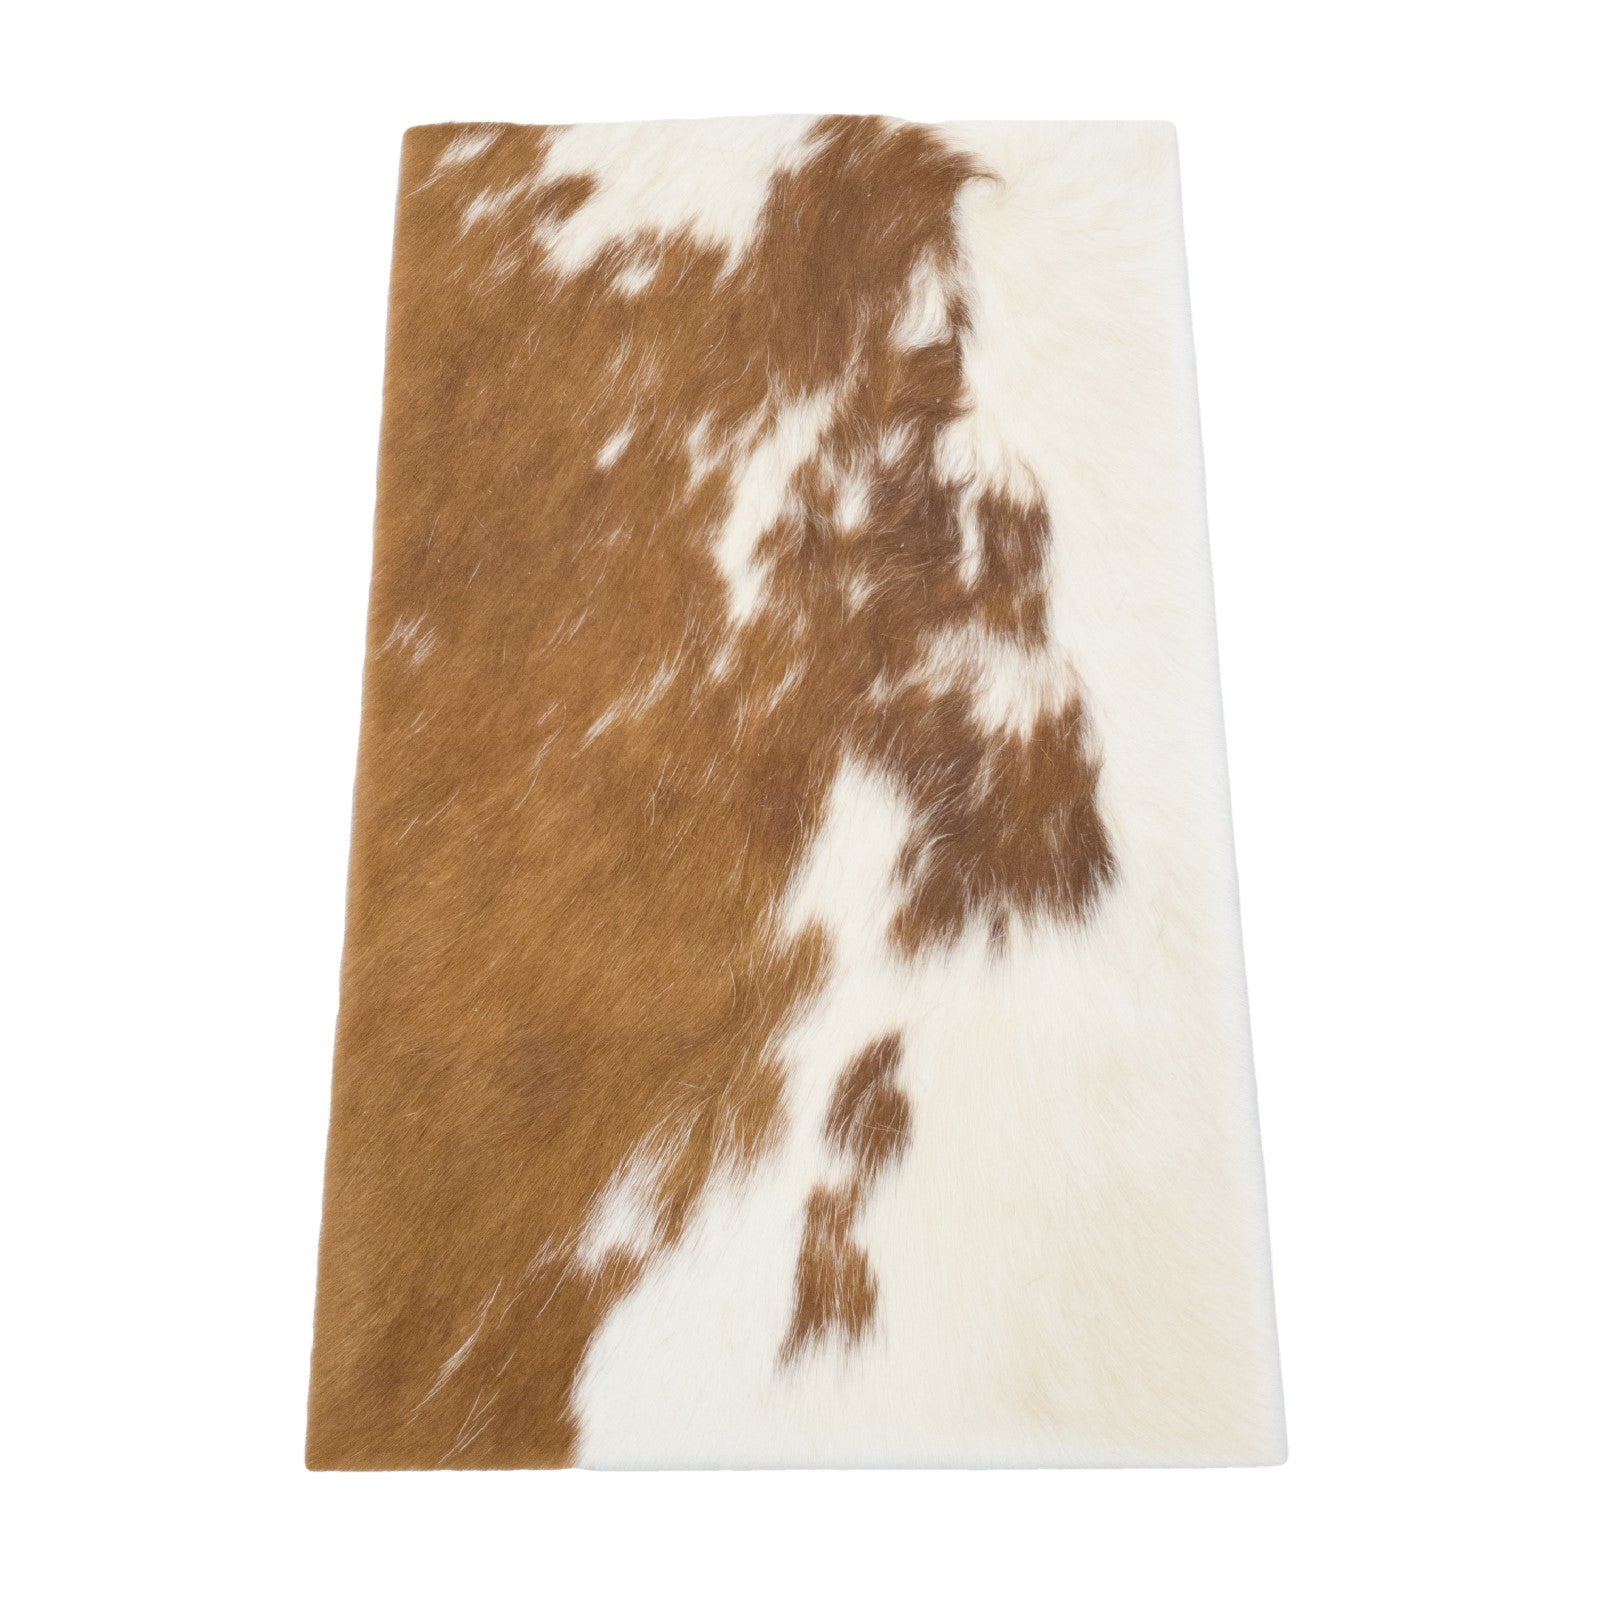 Bi-Color Medium Brown and Off-White Hair on Cow Hide Pre-cut, 20 x 12.25 | The Leather Guy